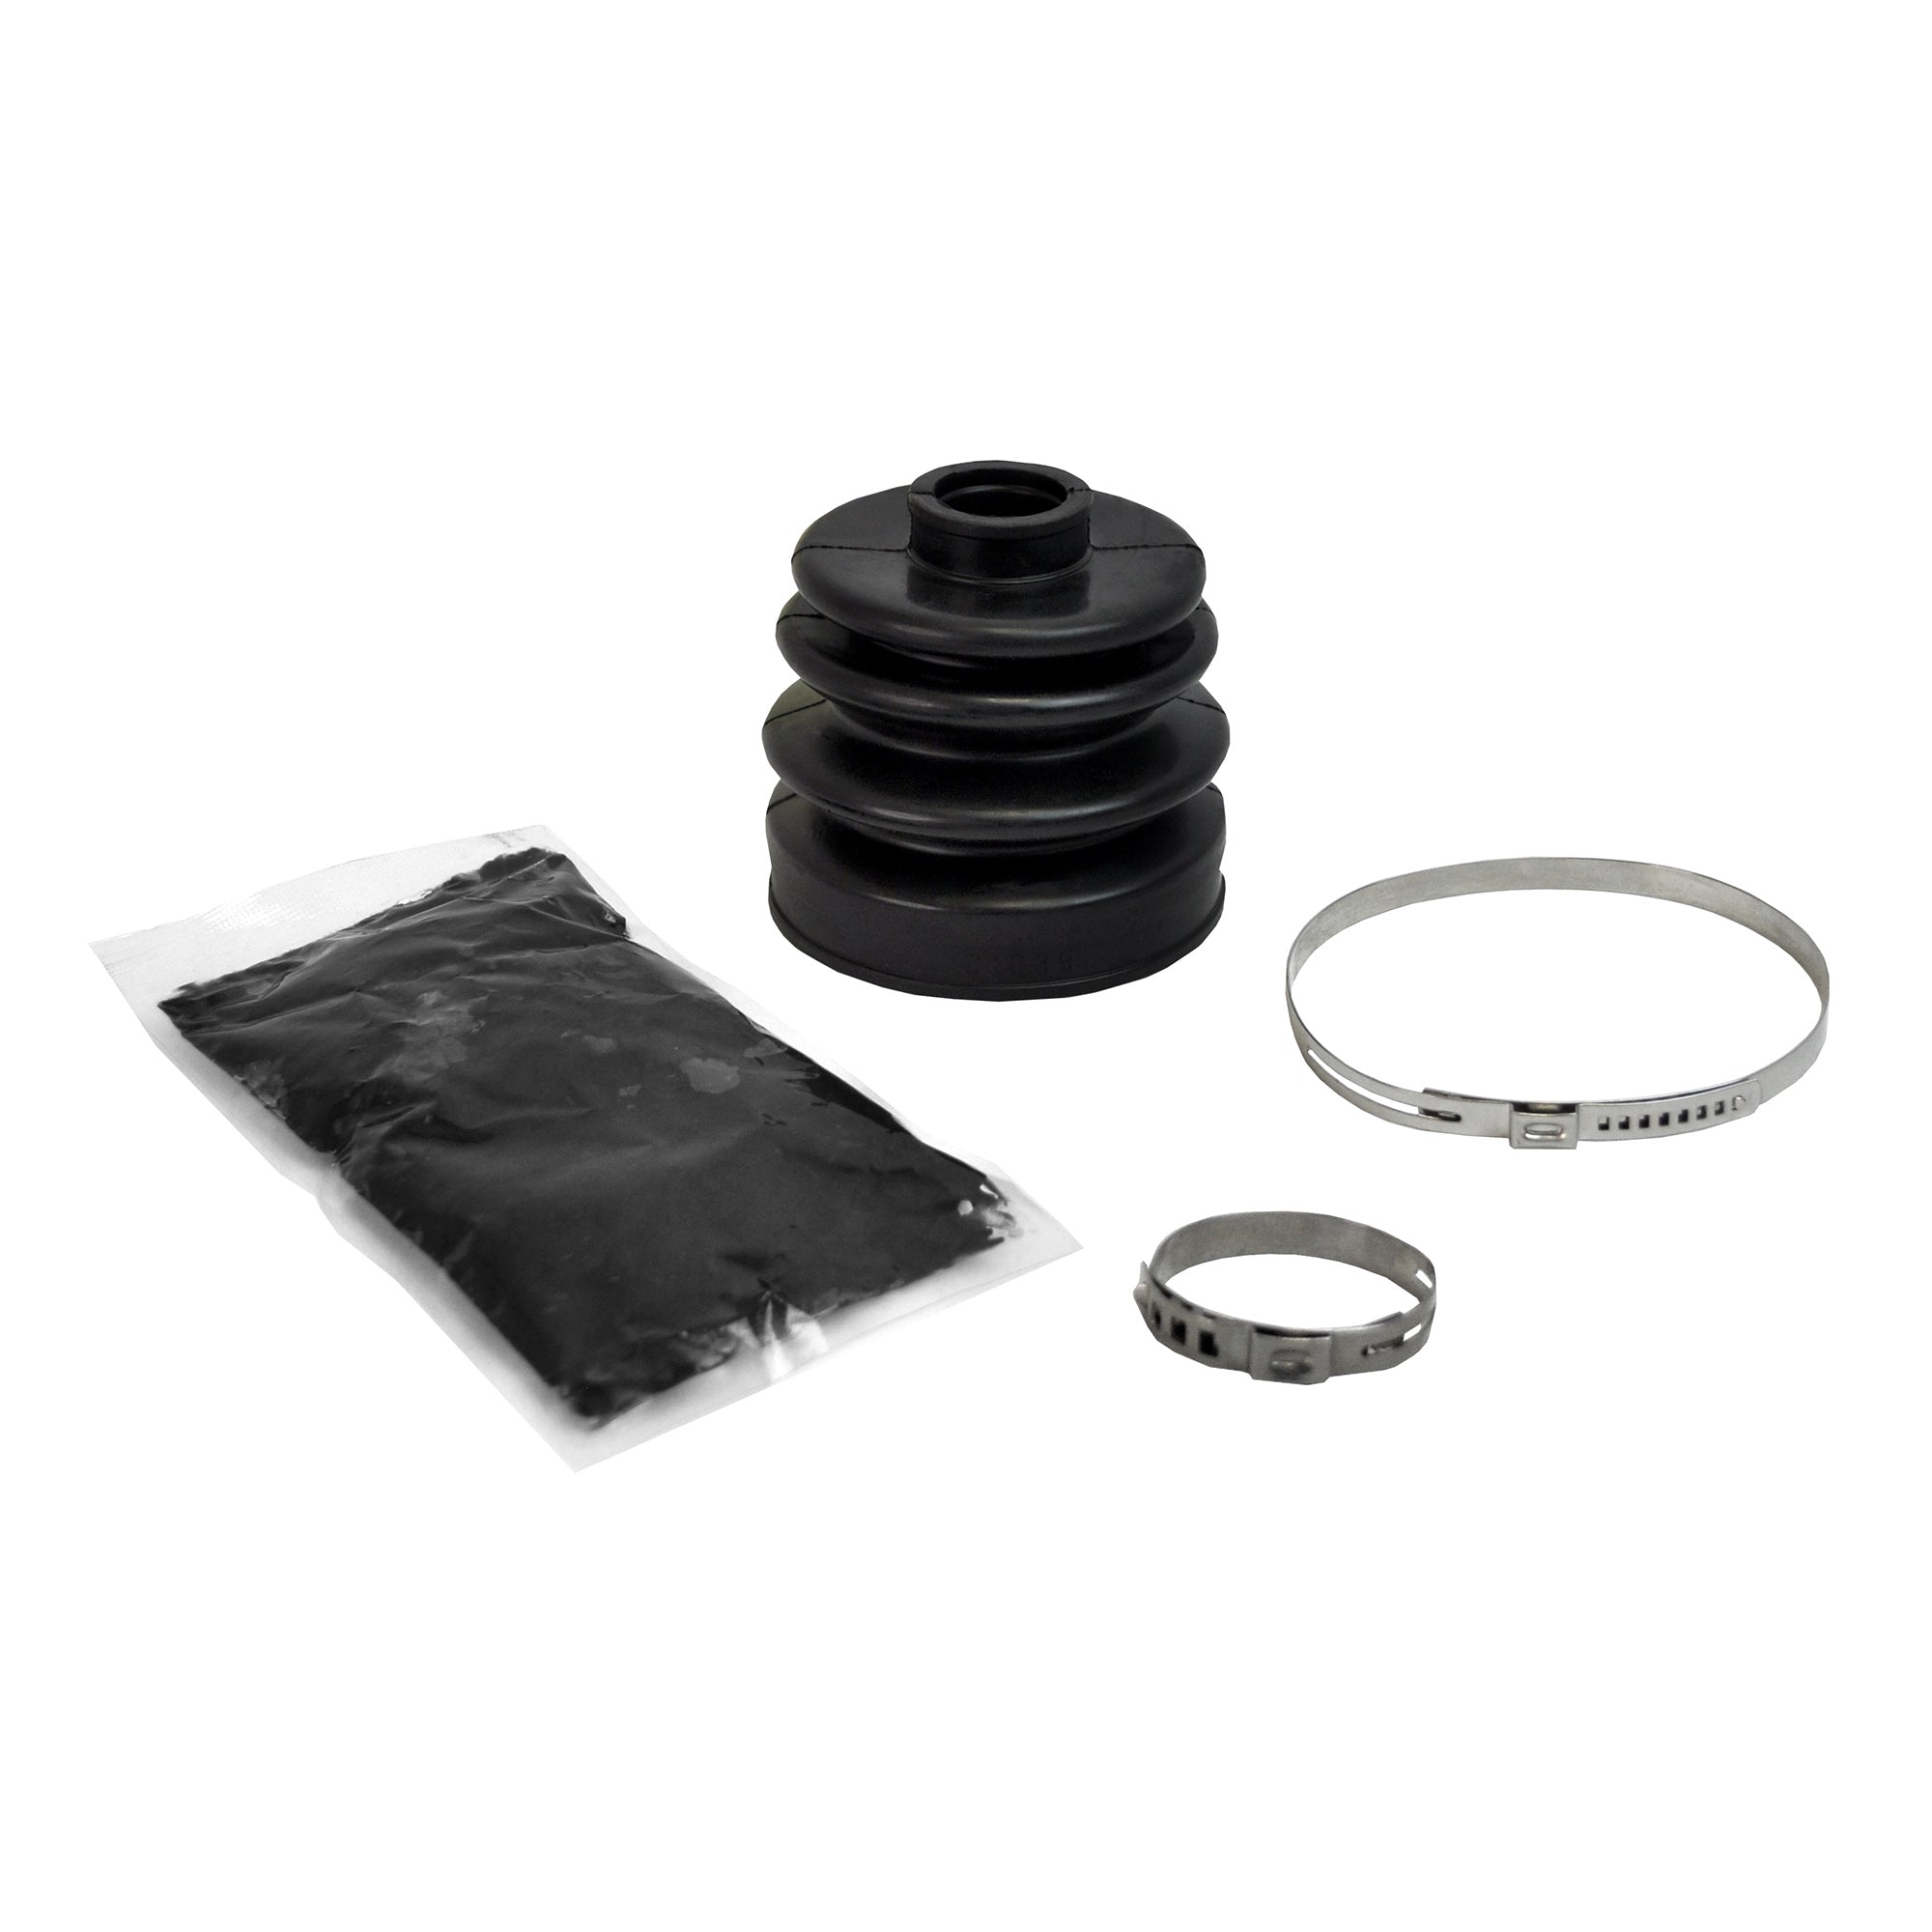 Polaris Trail Boss 350 Rugged OE Replacement Boot Kit